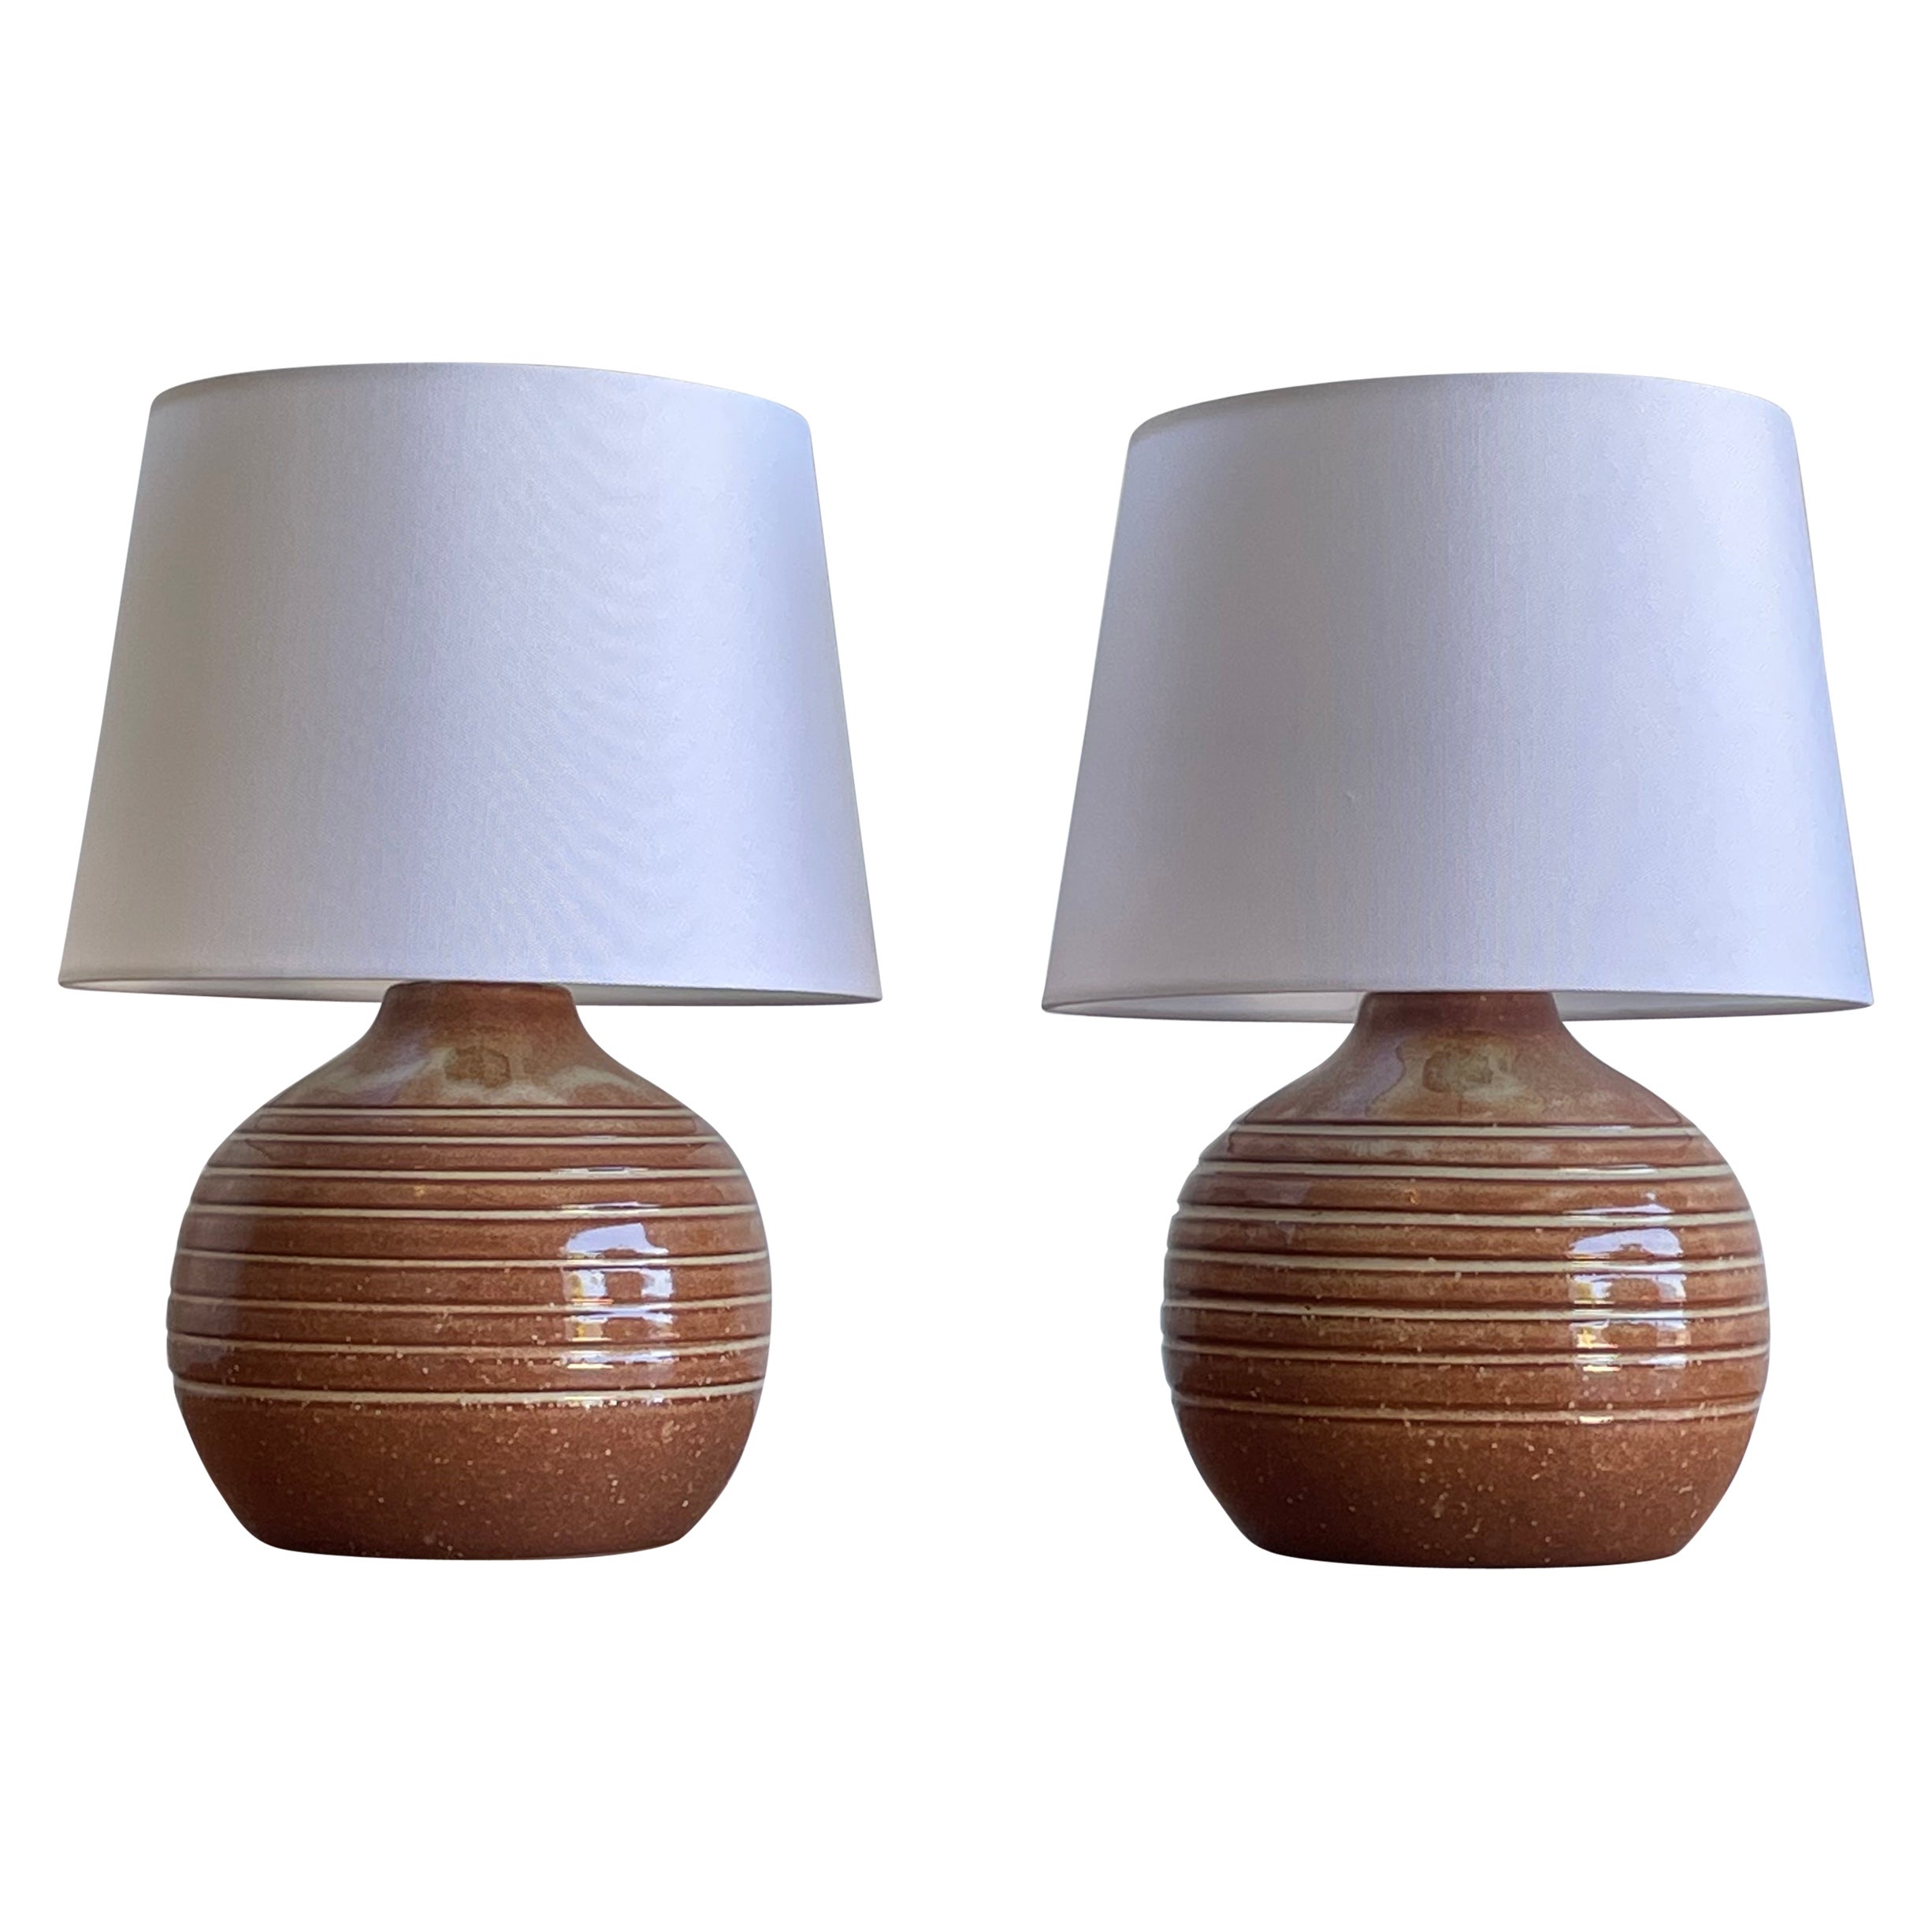 Pair of Martz Lamps by Jane and Gordon Martz for Marshall Studios